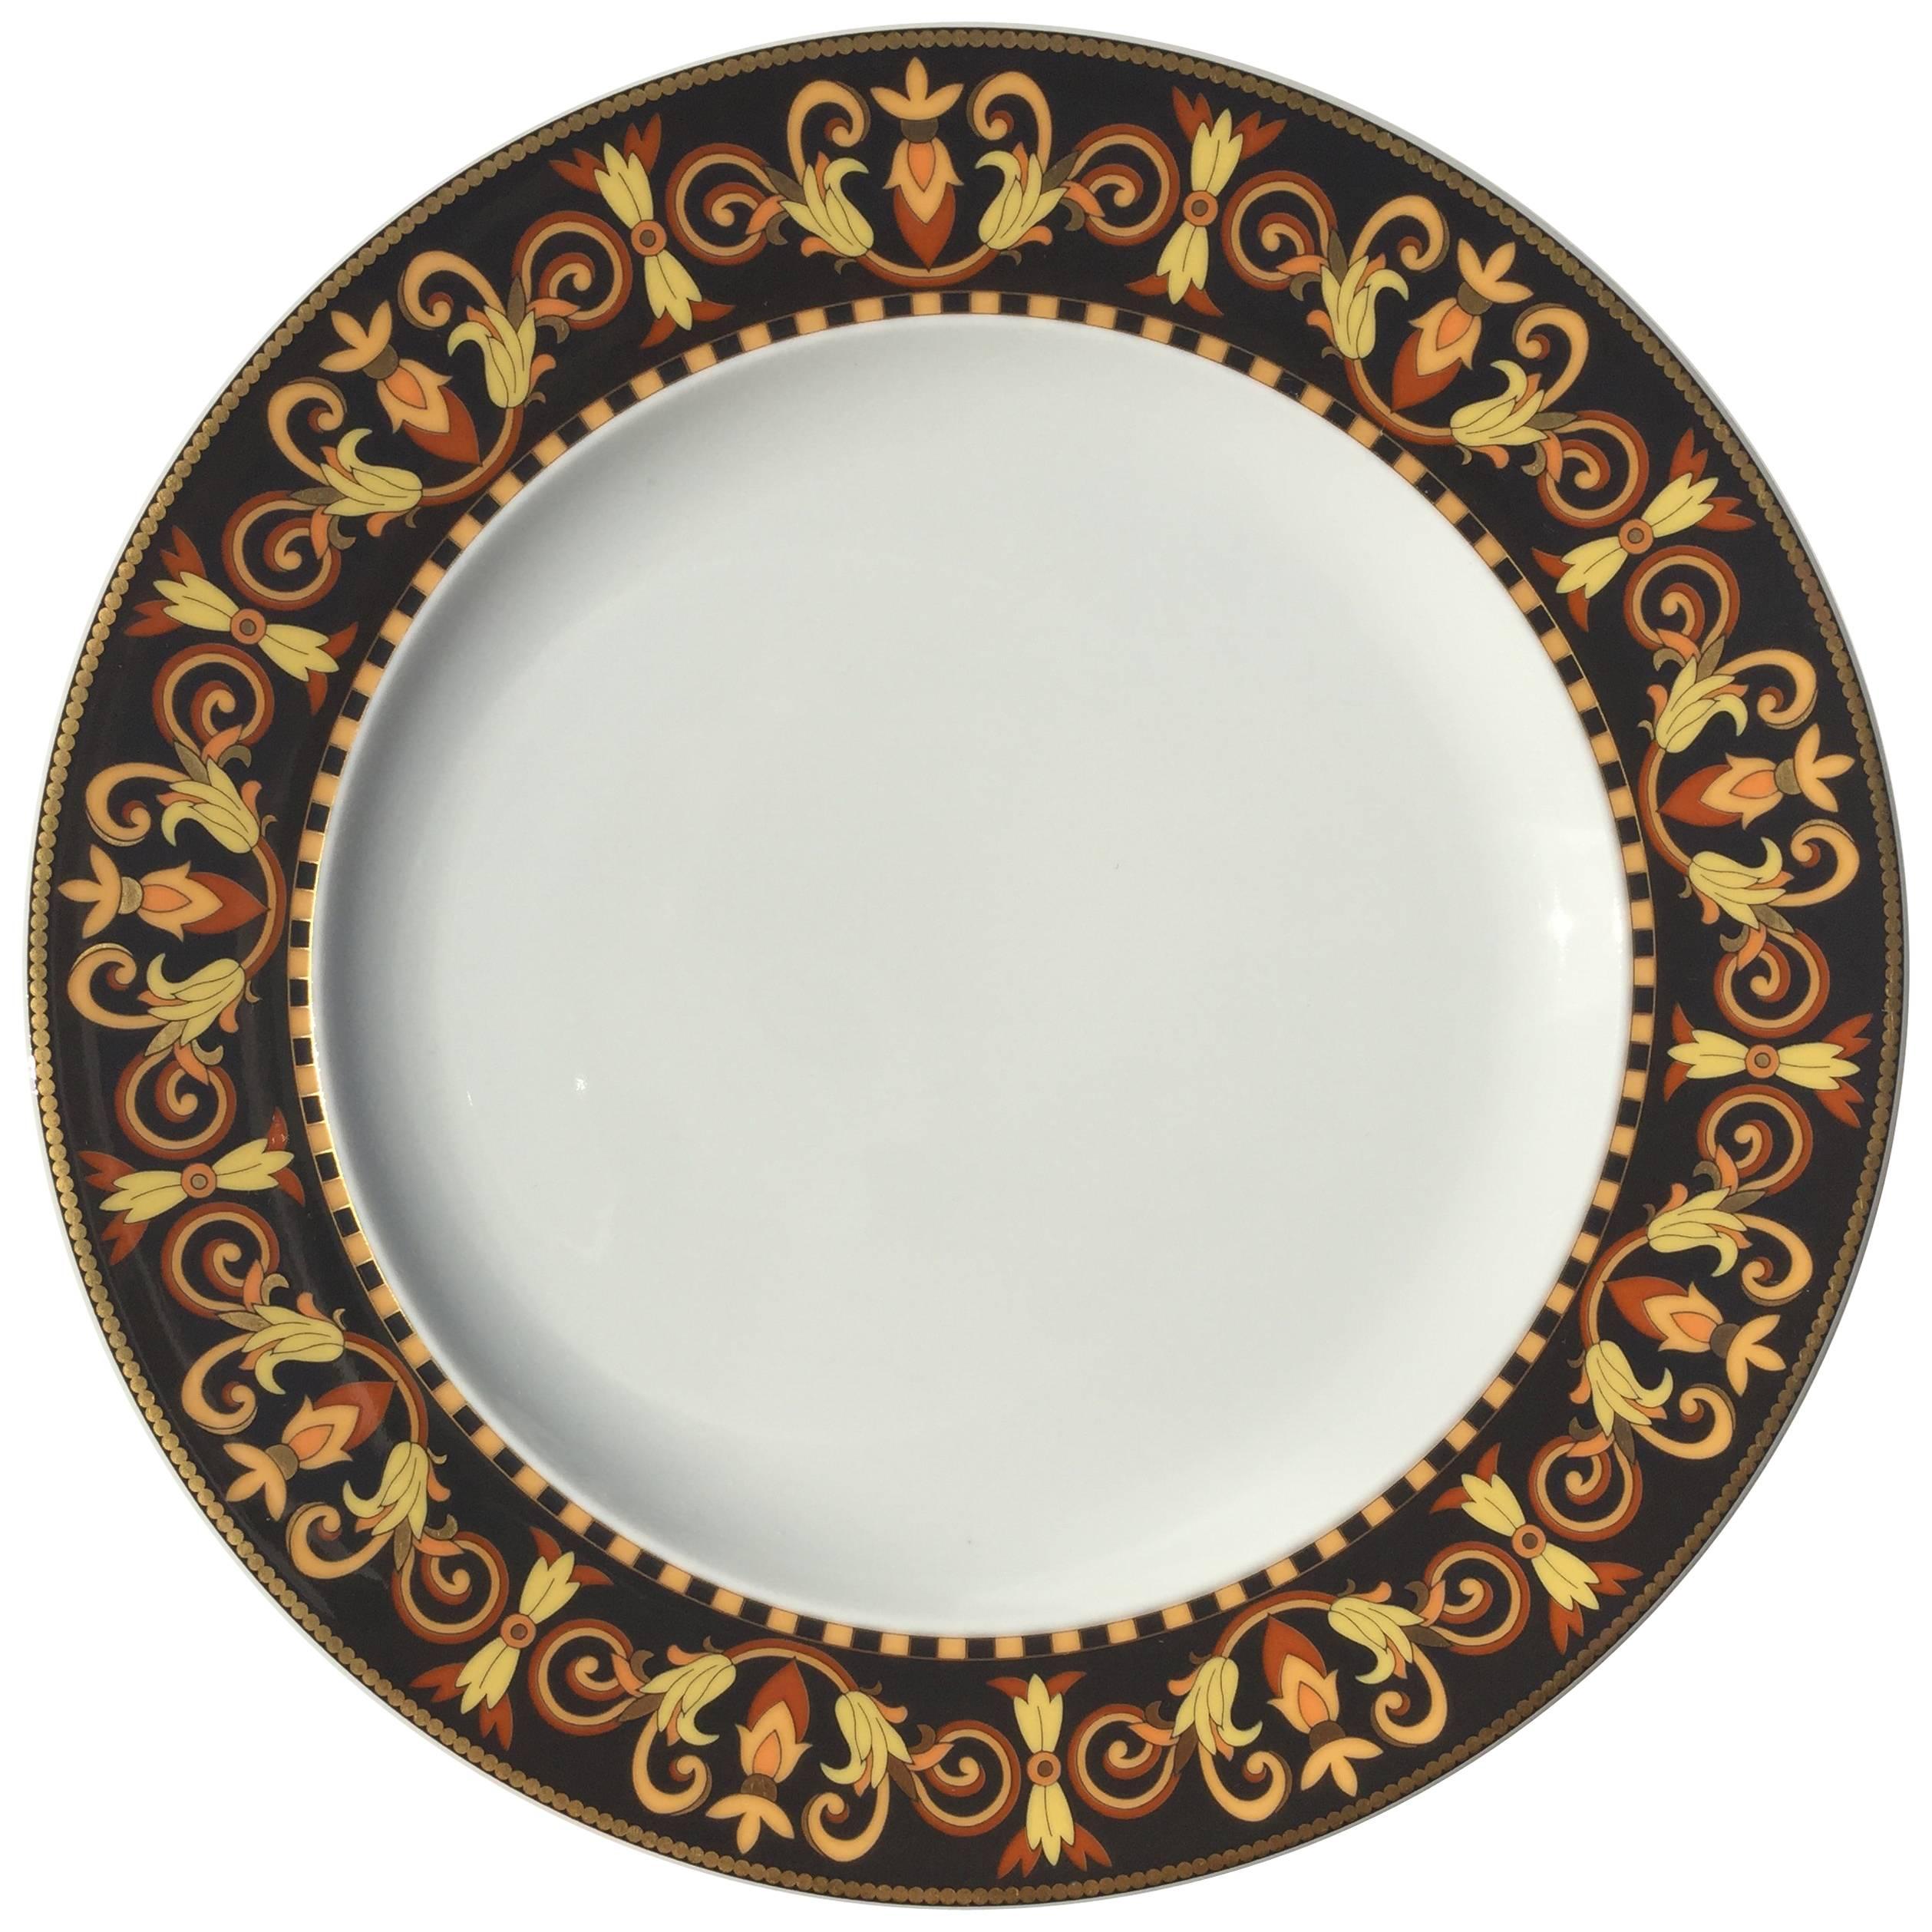 Versace "Barocco" Pattern Single Luncheon or Salad Plate, Rosenthal Porcelain